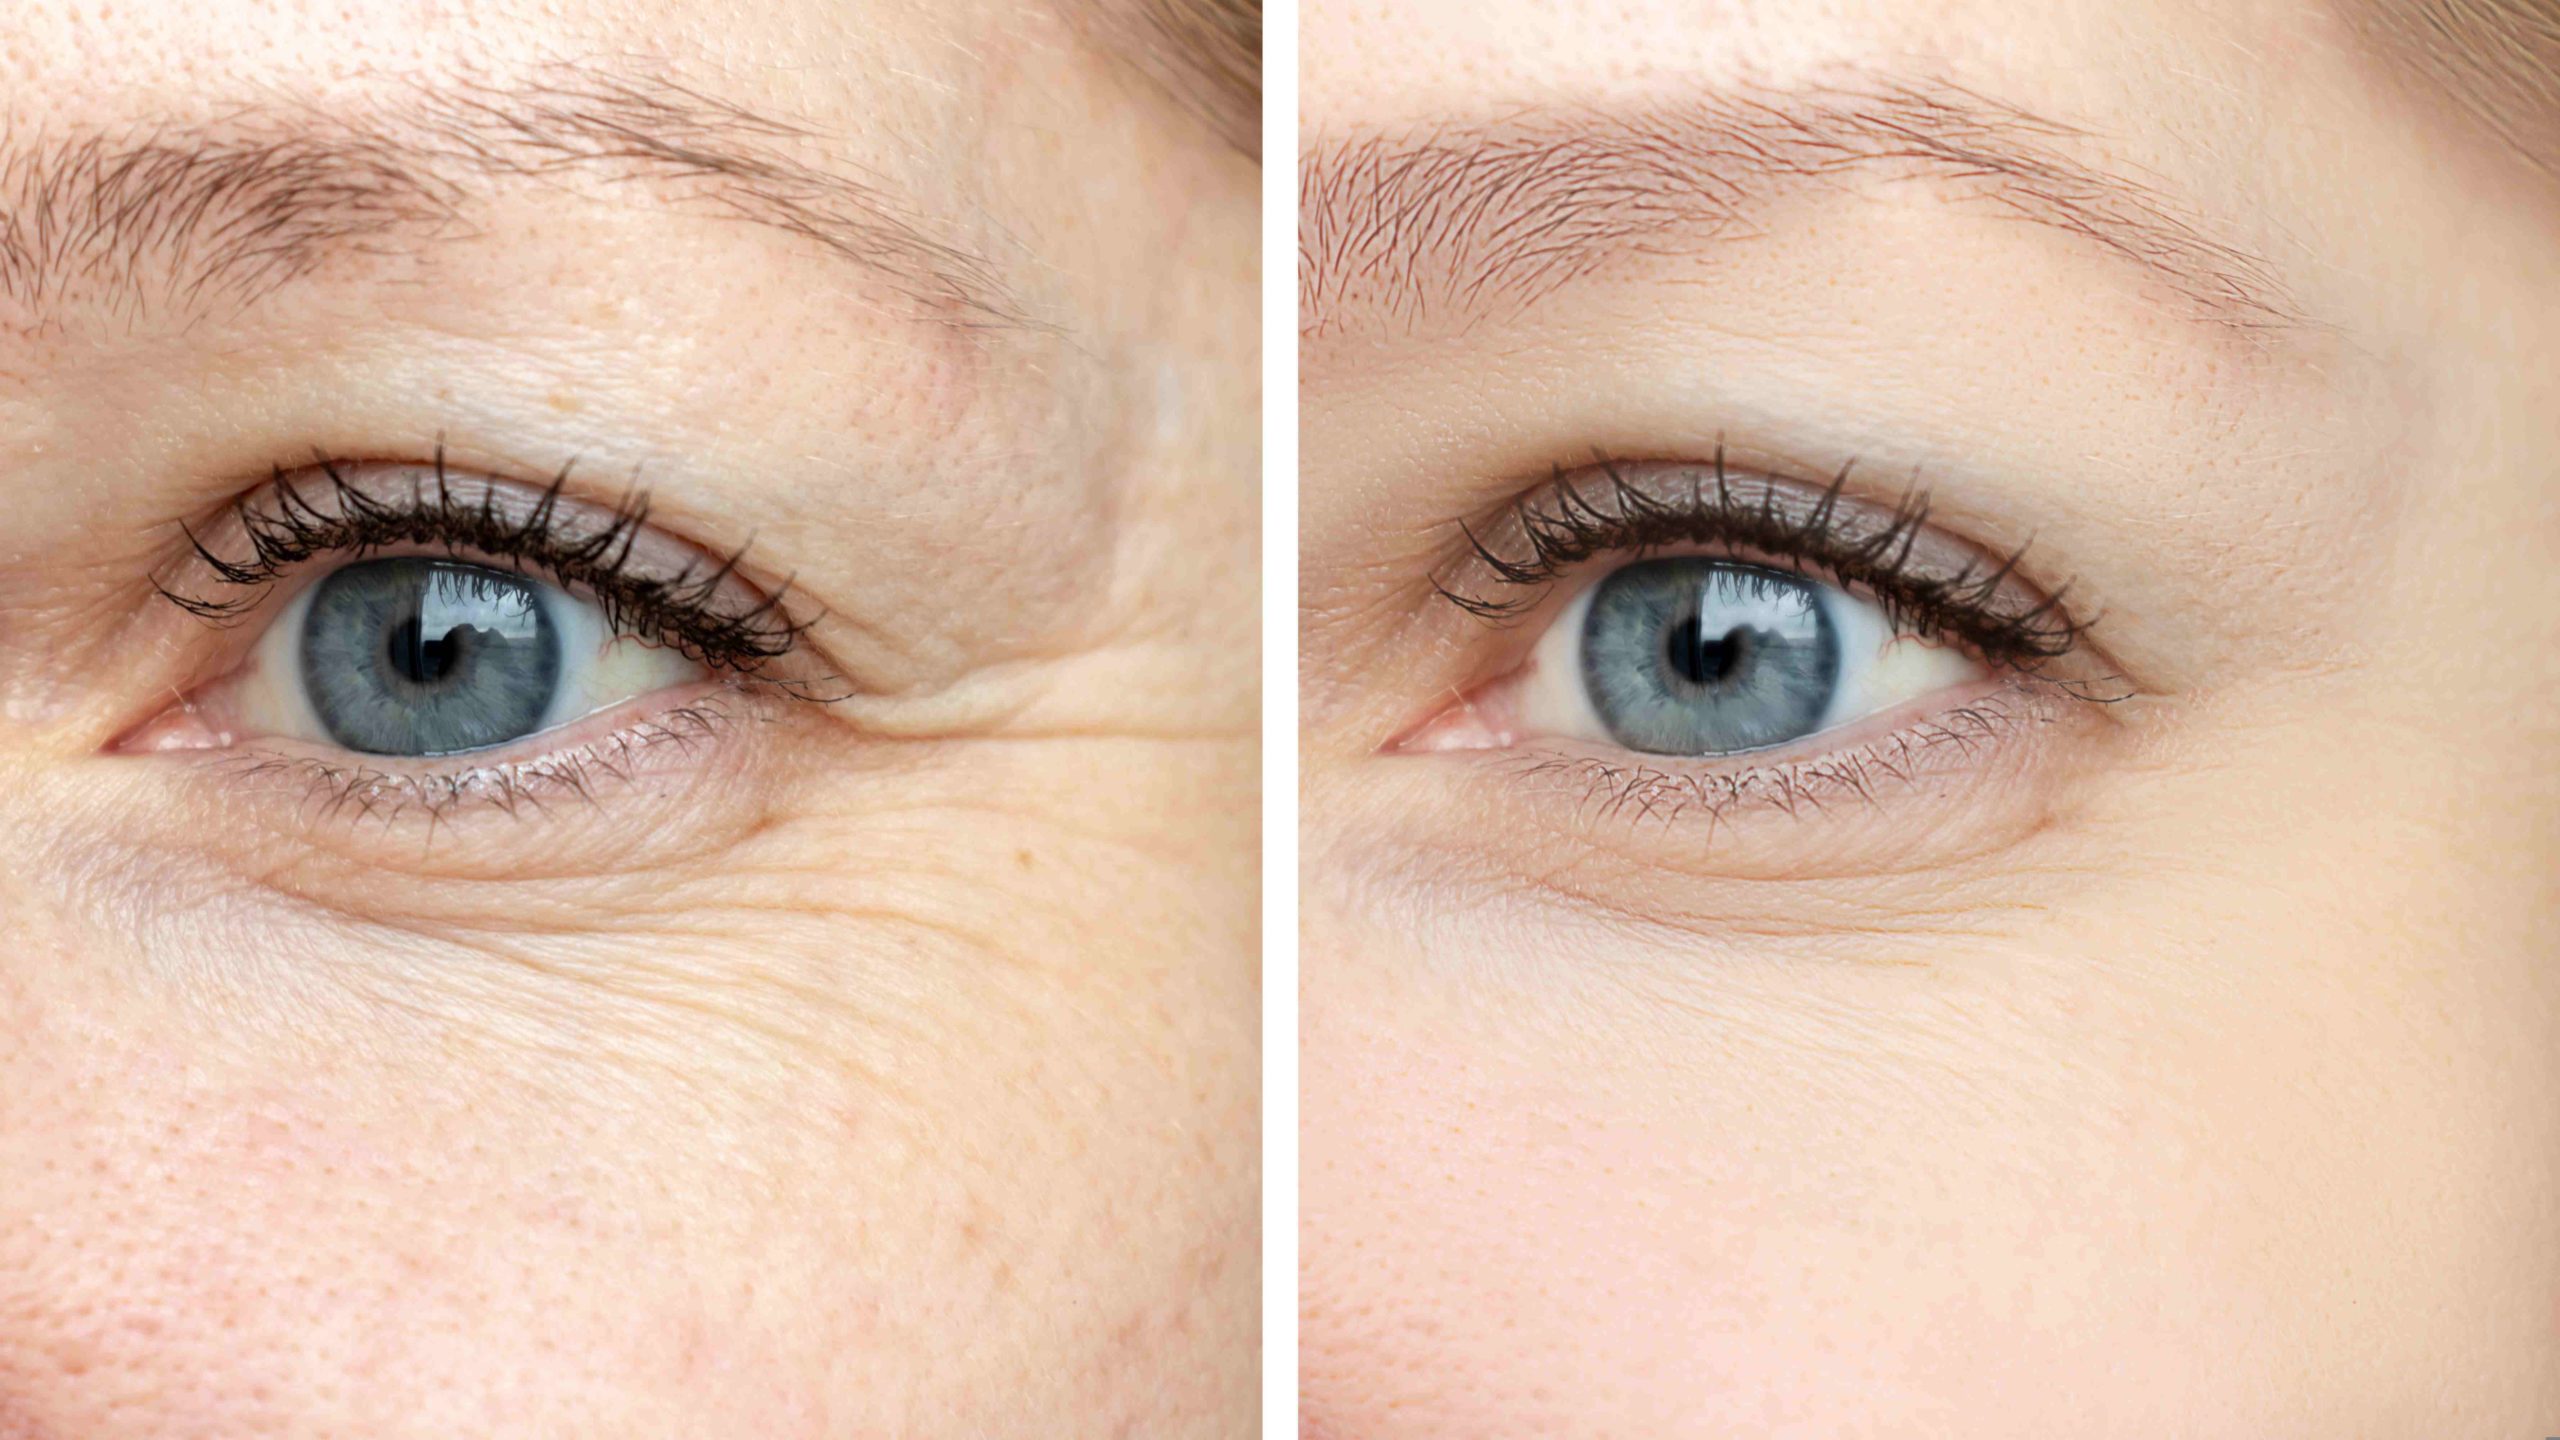 “Botox Under Eyes: Before and After Transformation” - BeautyKylie